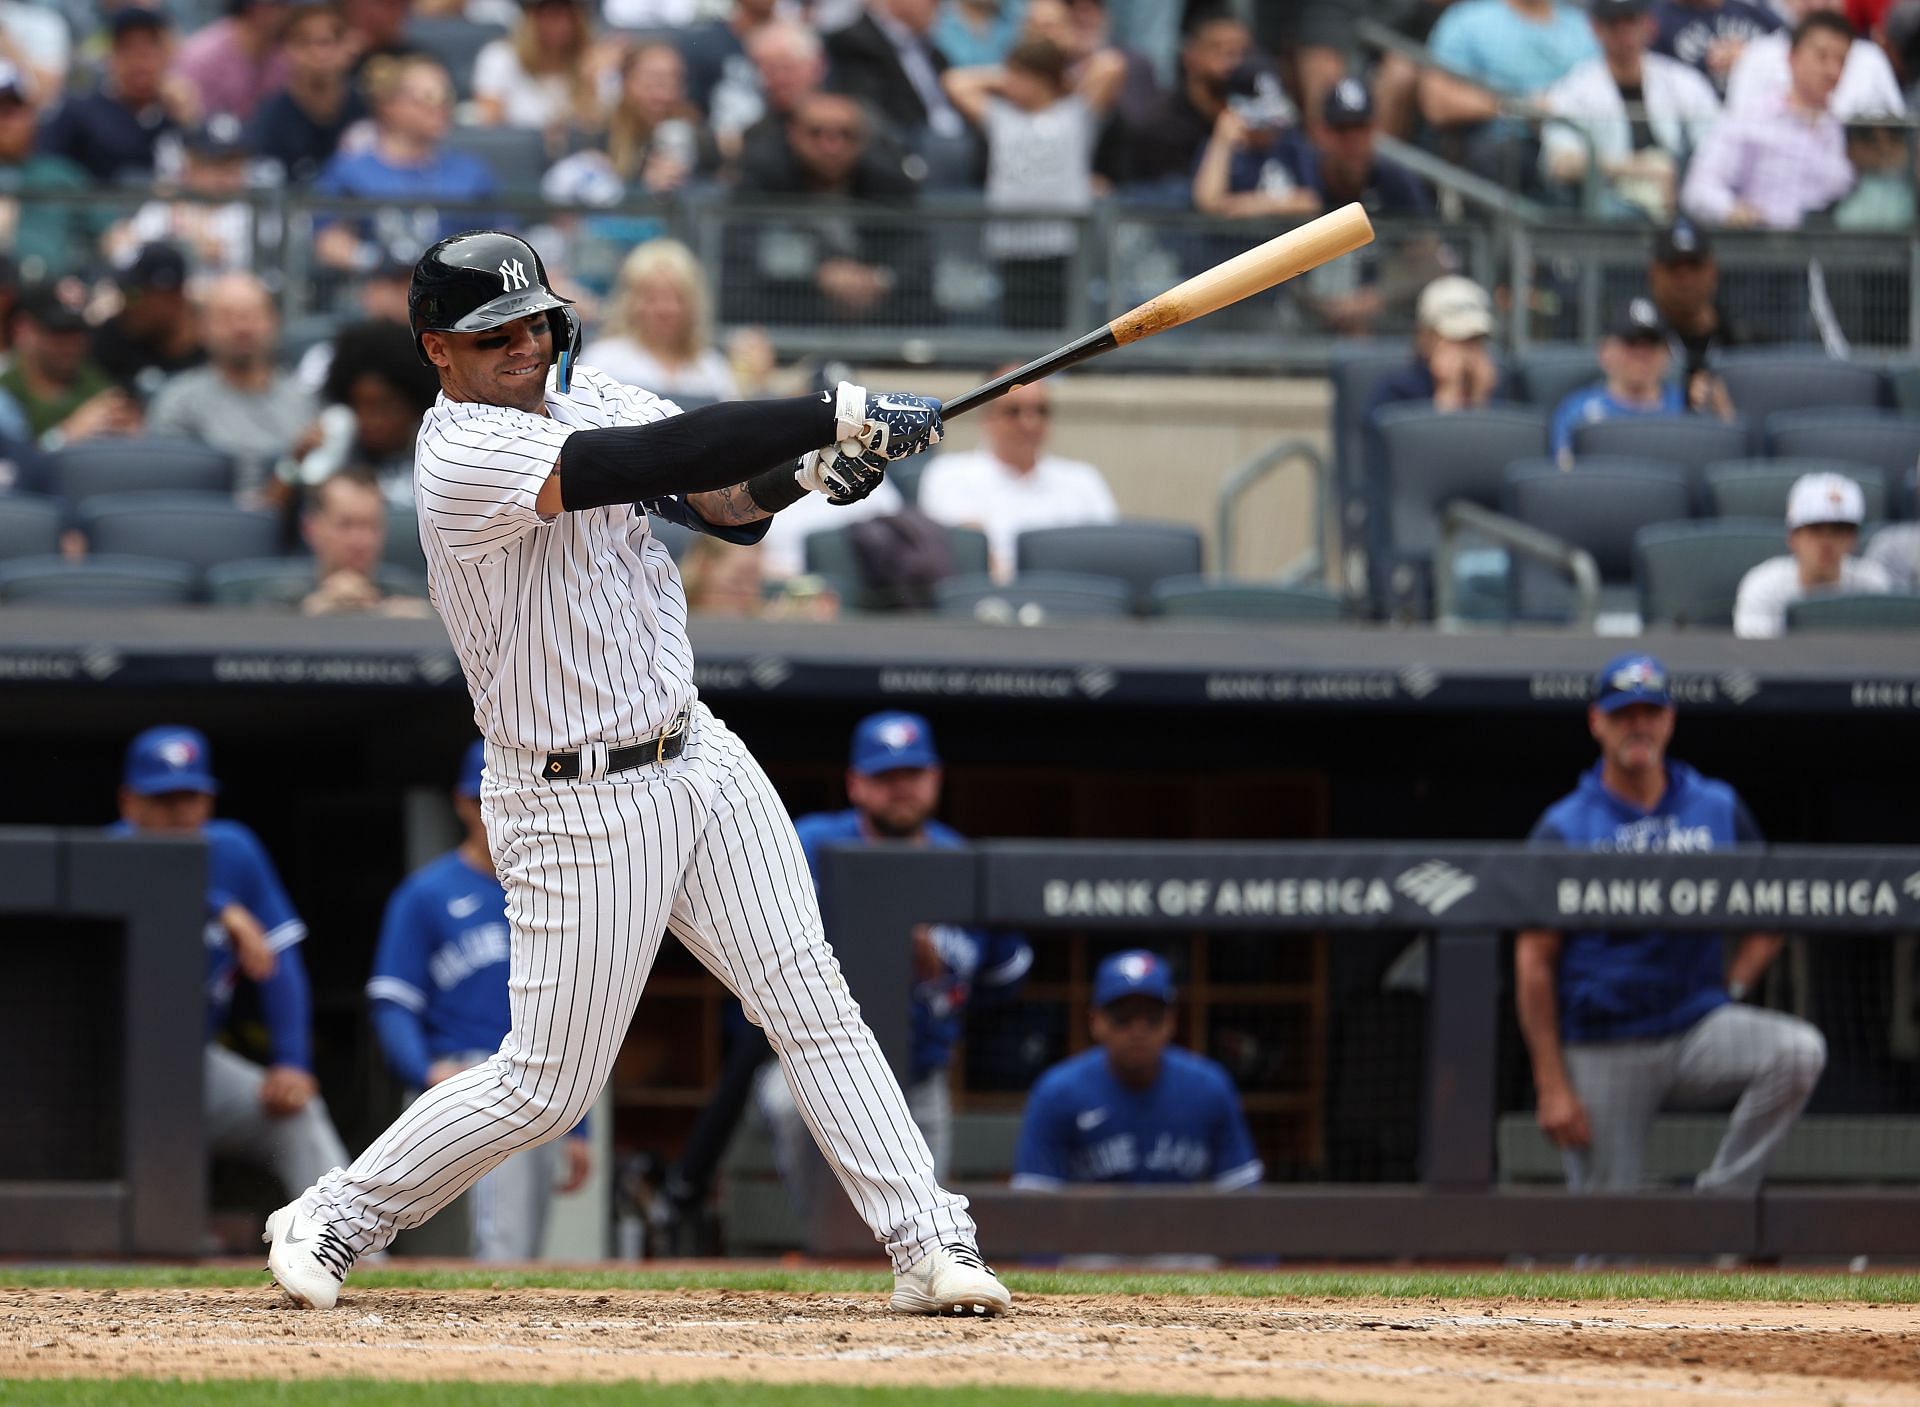 The Yankees will face the Chicago White Sox Thursday.